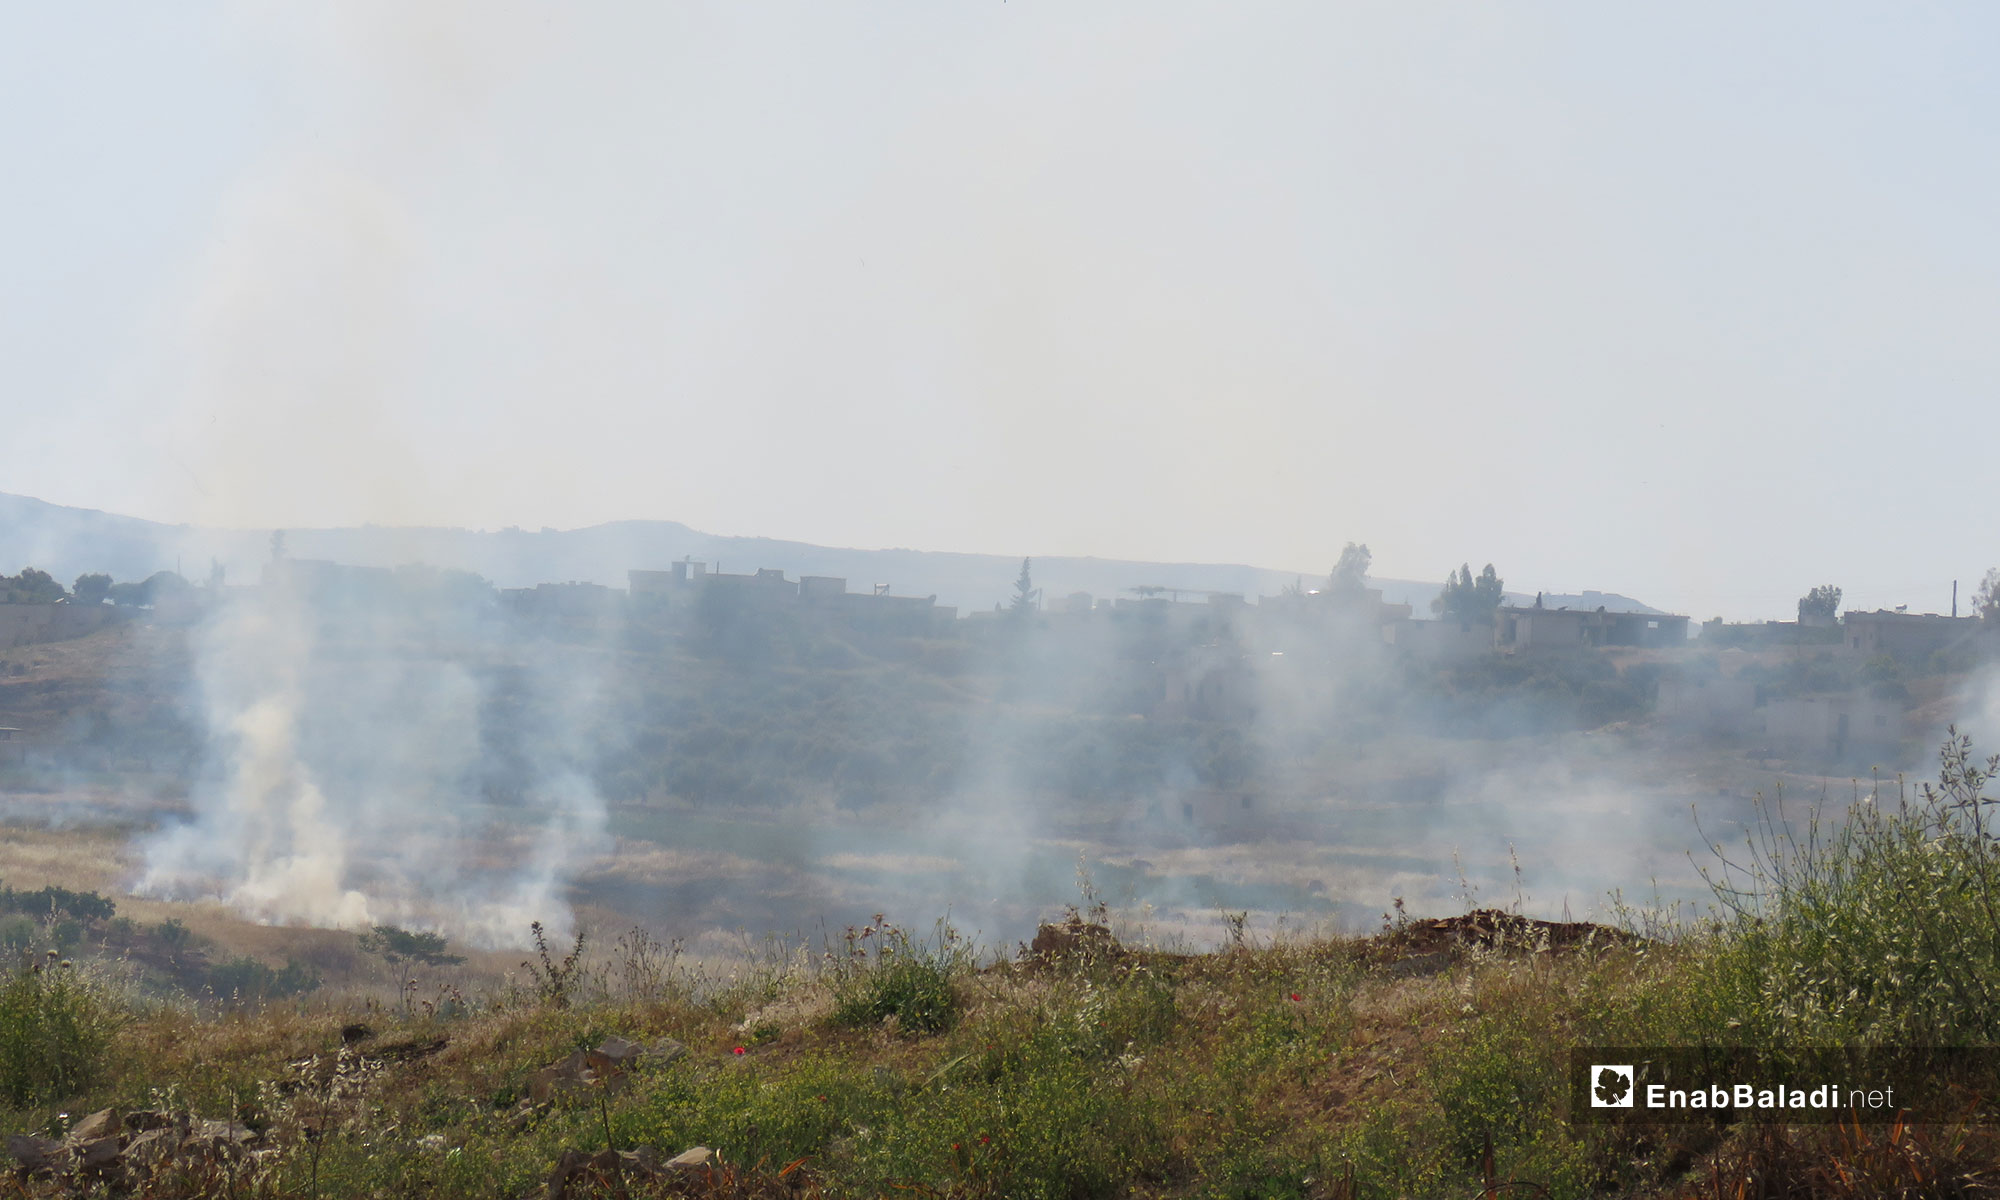 Crops caught fire in the town of Tramla, southern Idlib, after the area was targeted by rocket launchers – May 14, 2019 (Enab Baladi)

